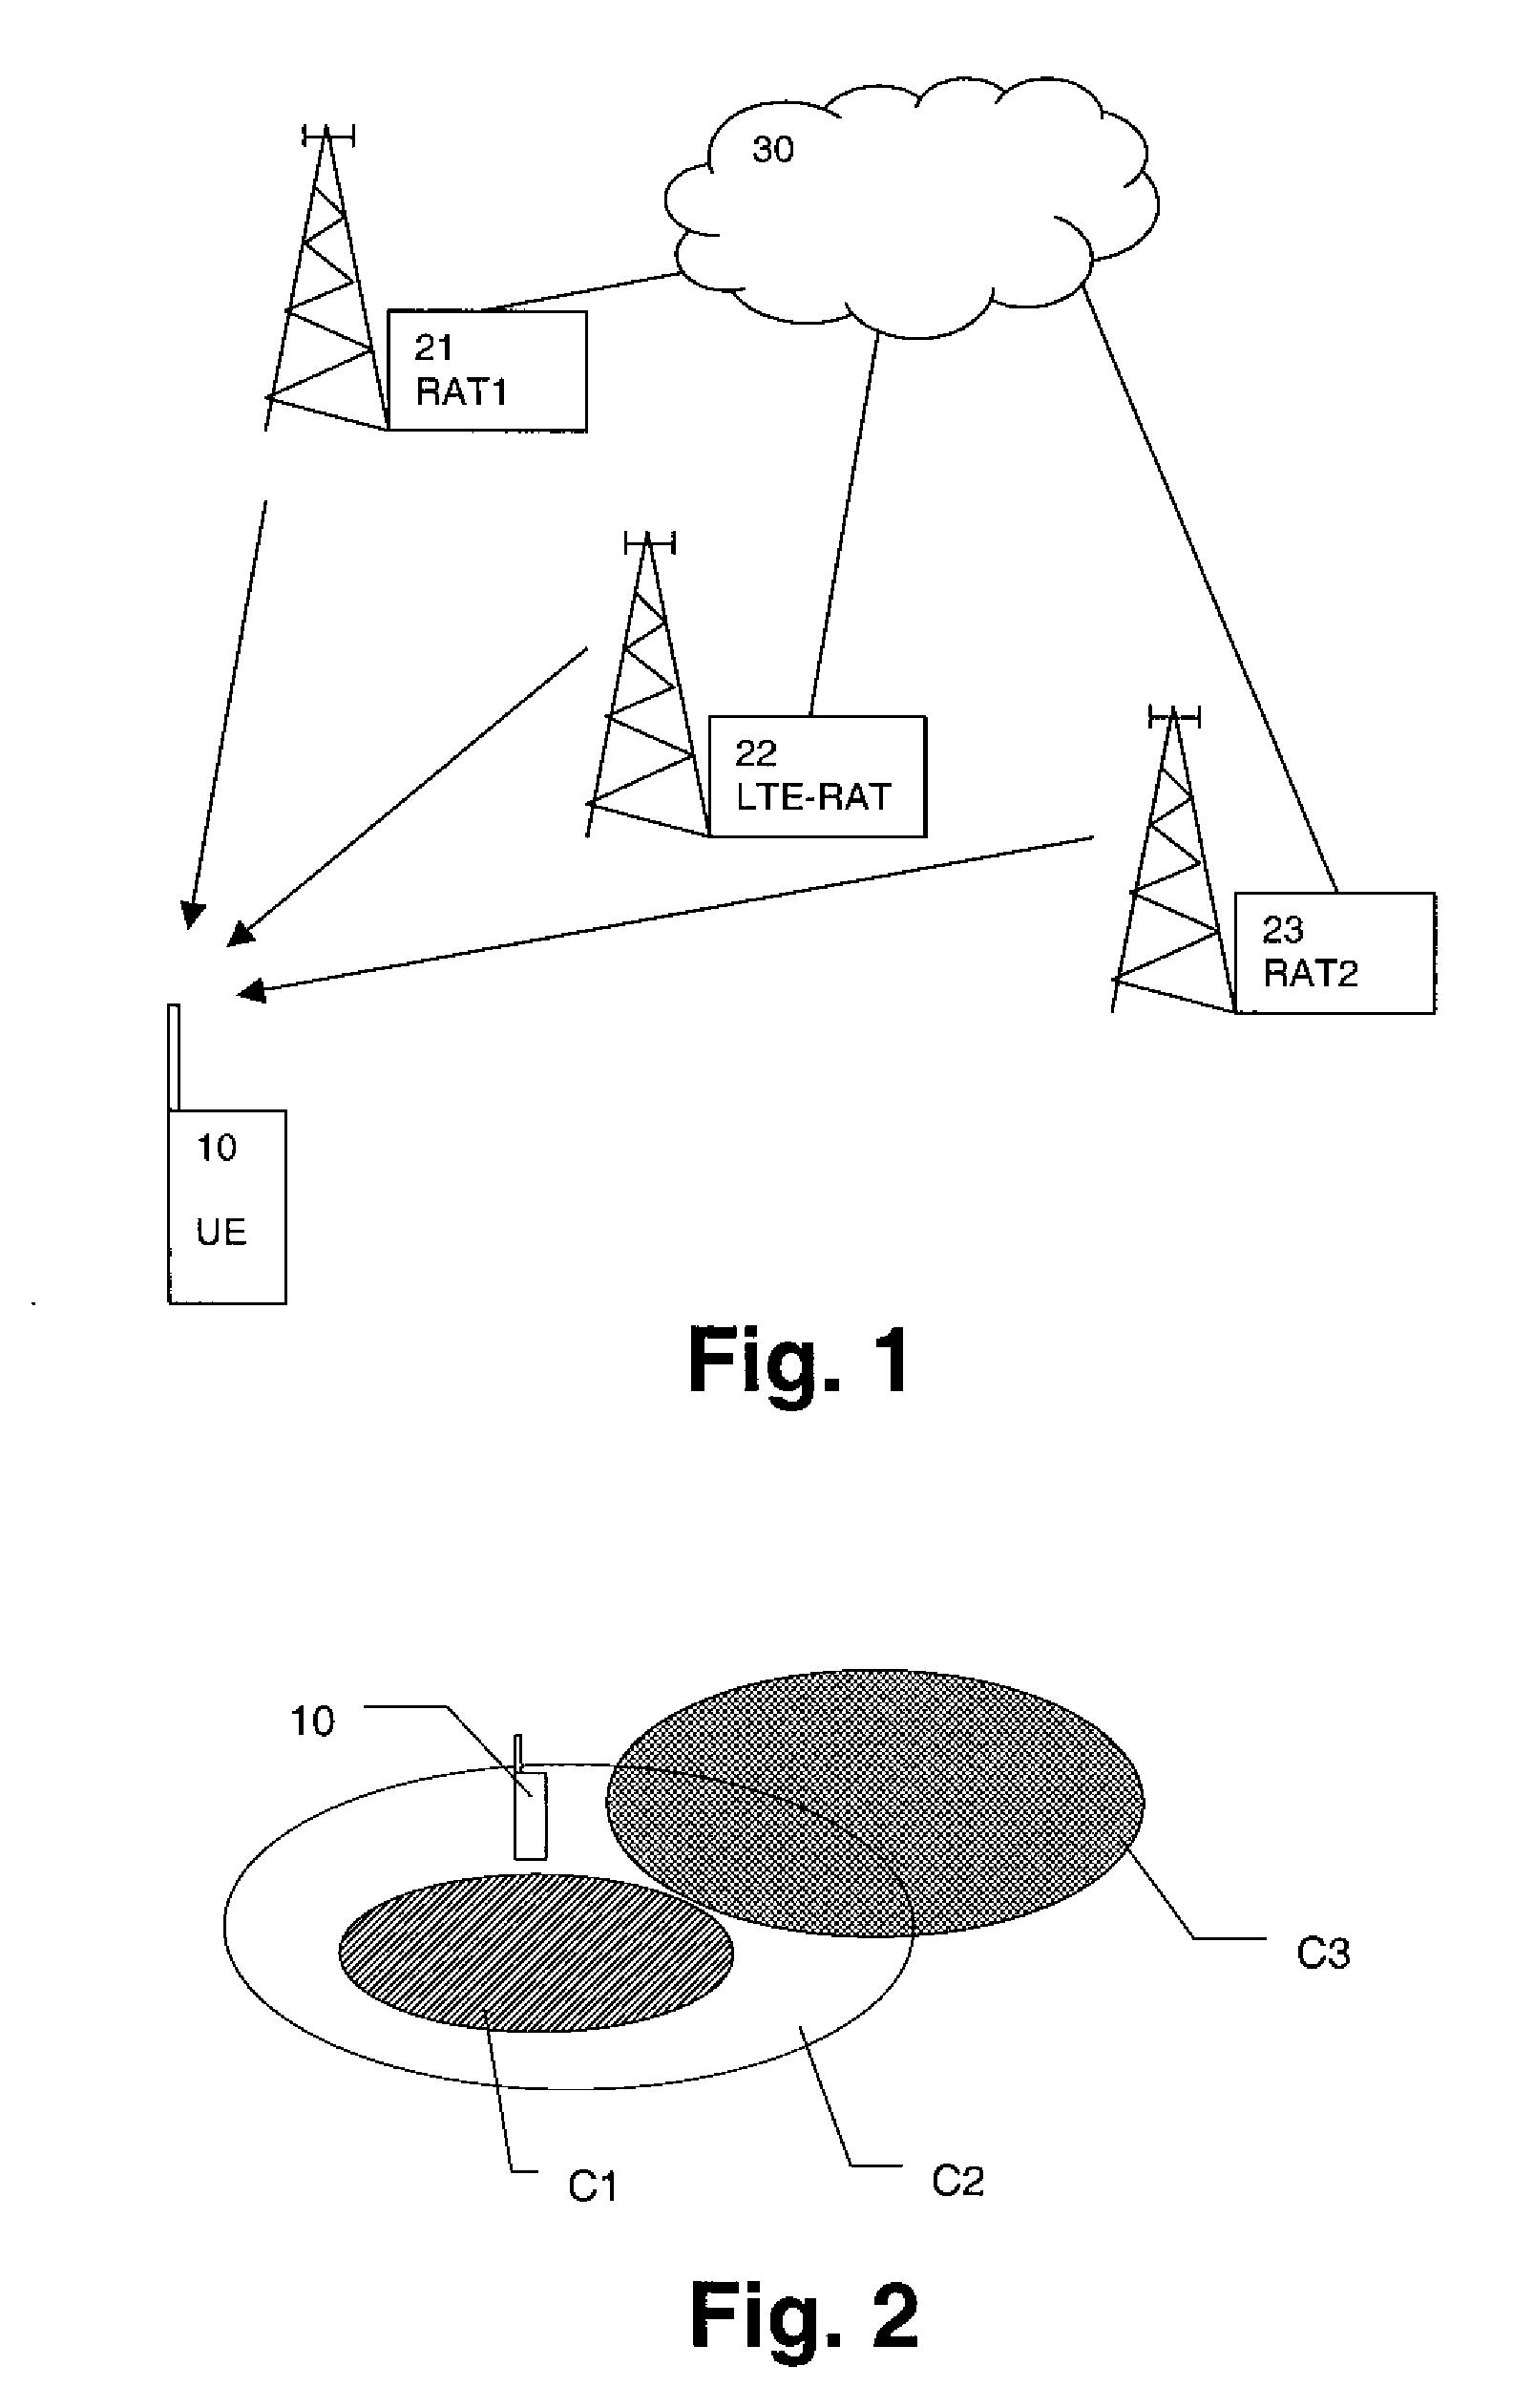 Method and Apparatus for Providing Service-Based Cell Reselection